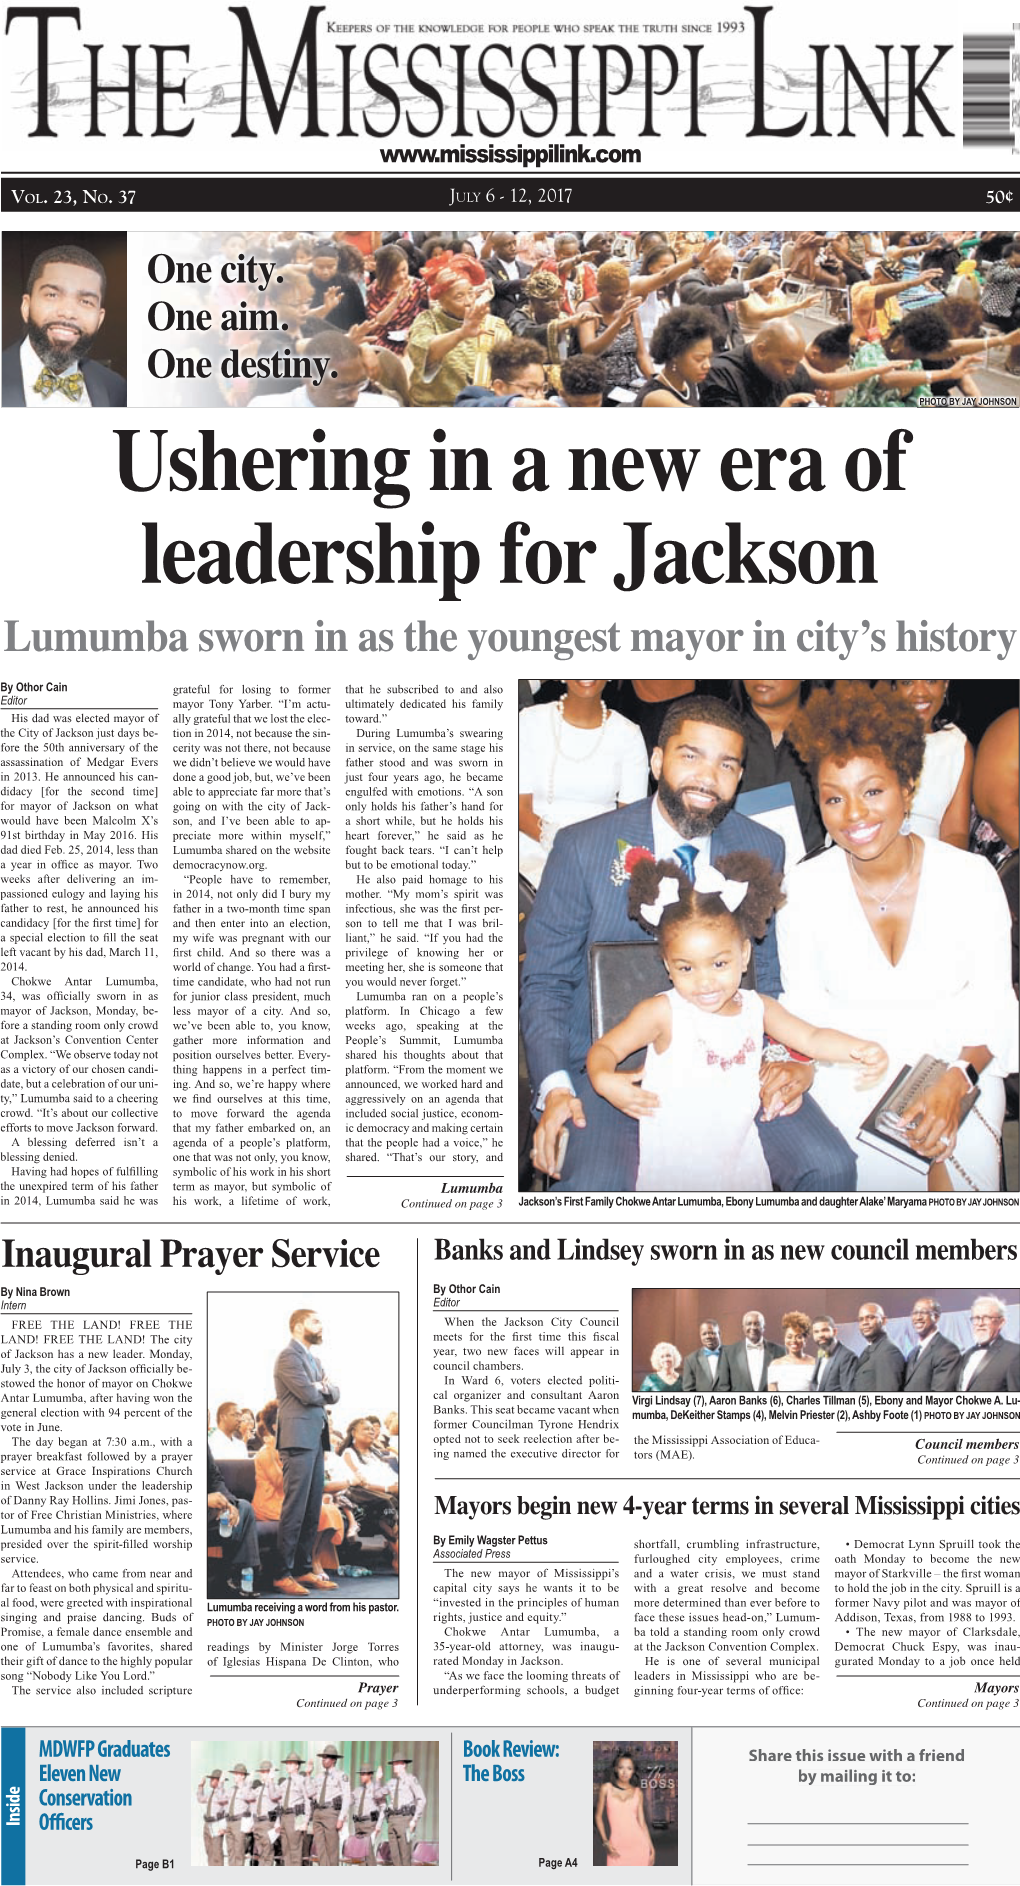 Lumumba Sworn in As the Youngest Mayor in City's History